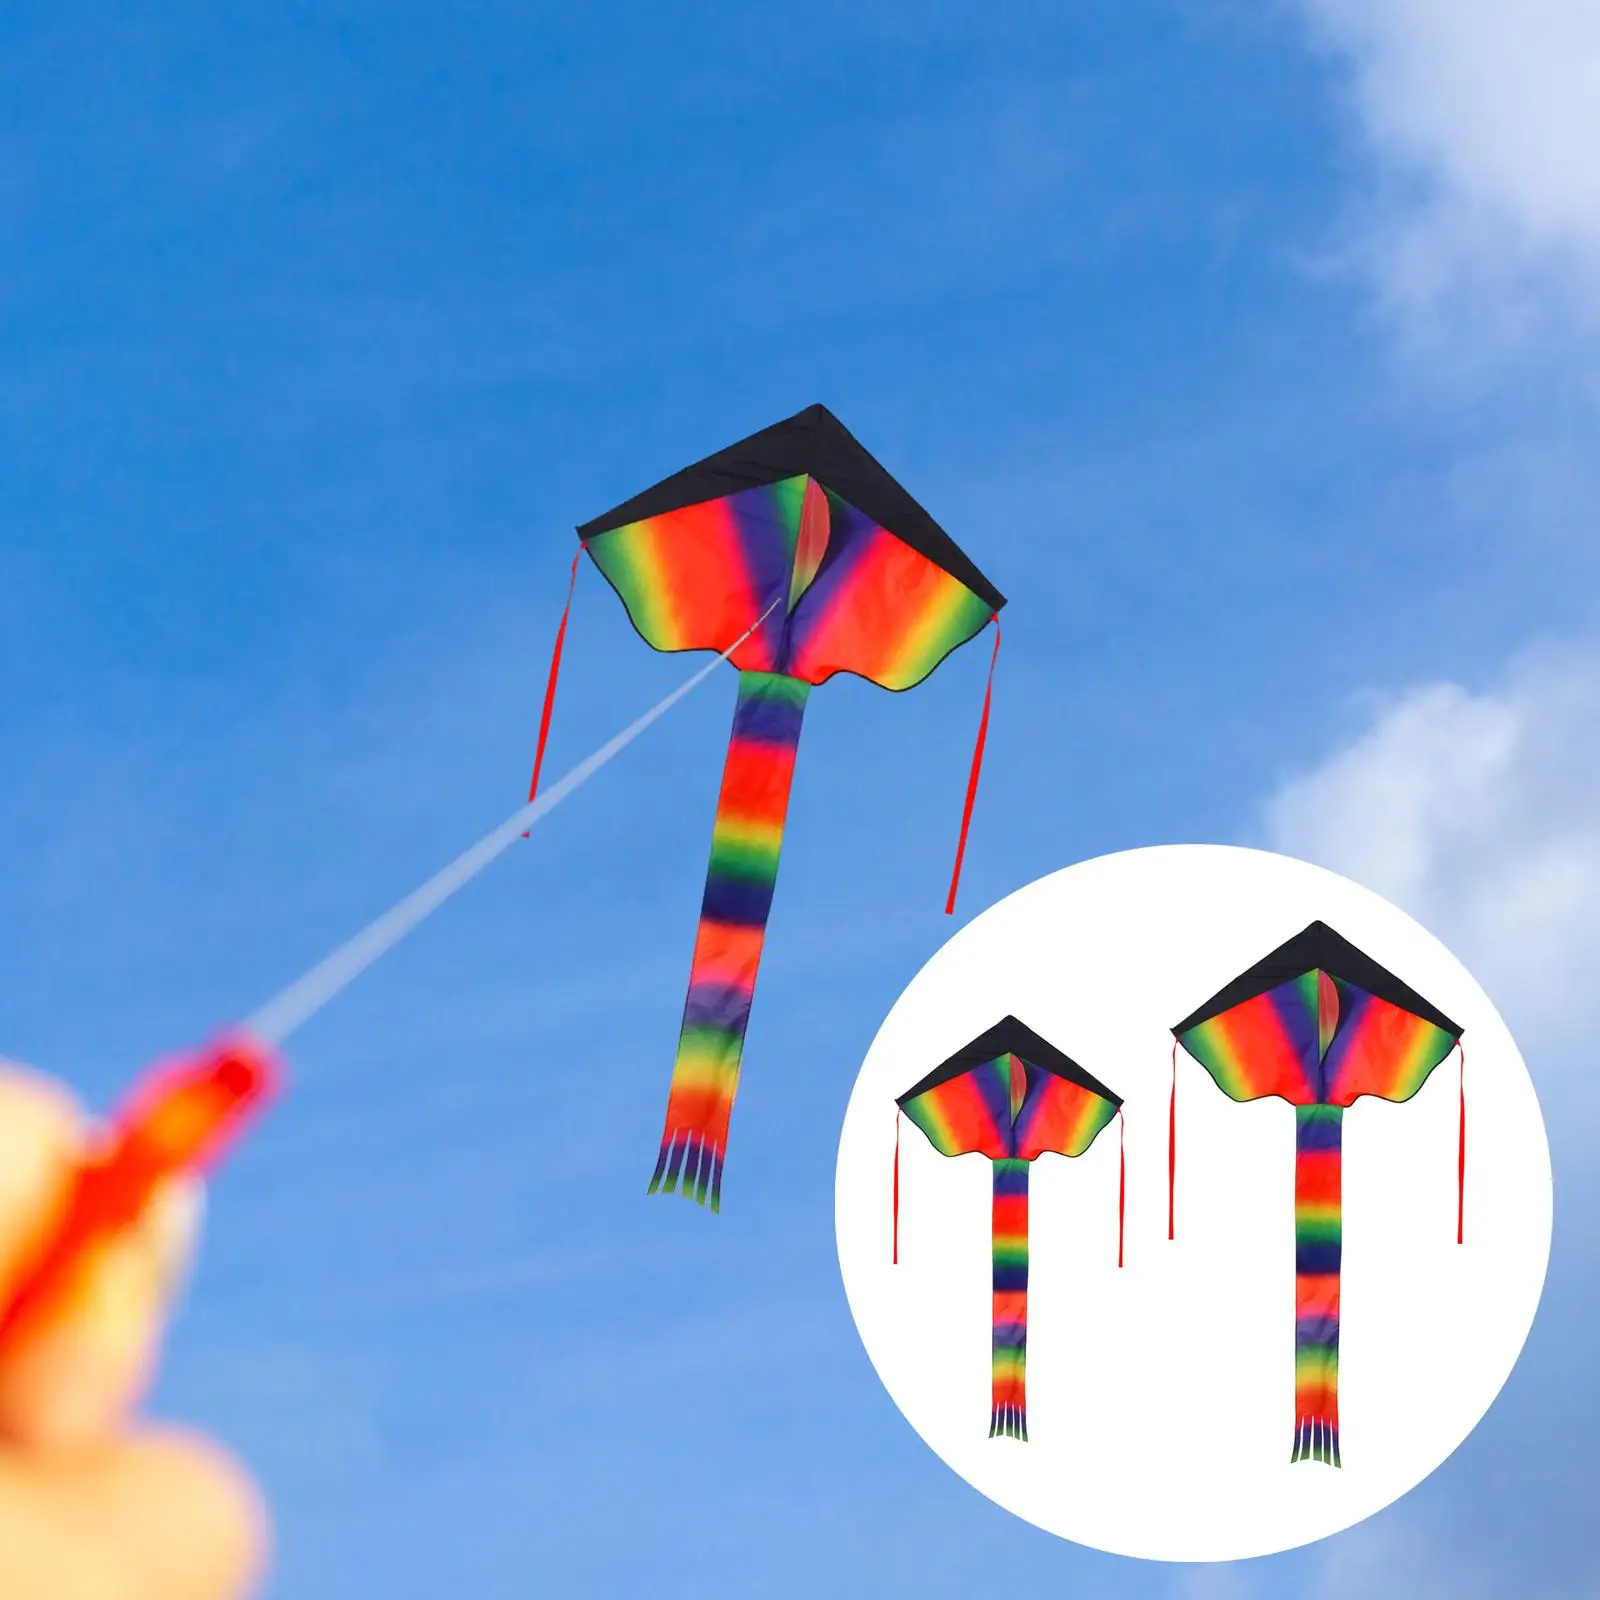 Large Delta Kites Fly Kite Vivid Easy to Fly Windsock Huge 1 Width for Beach Teenagers Games